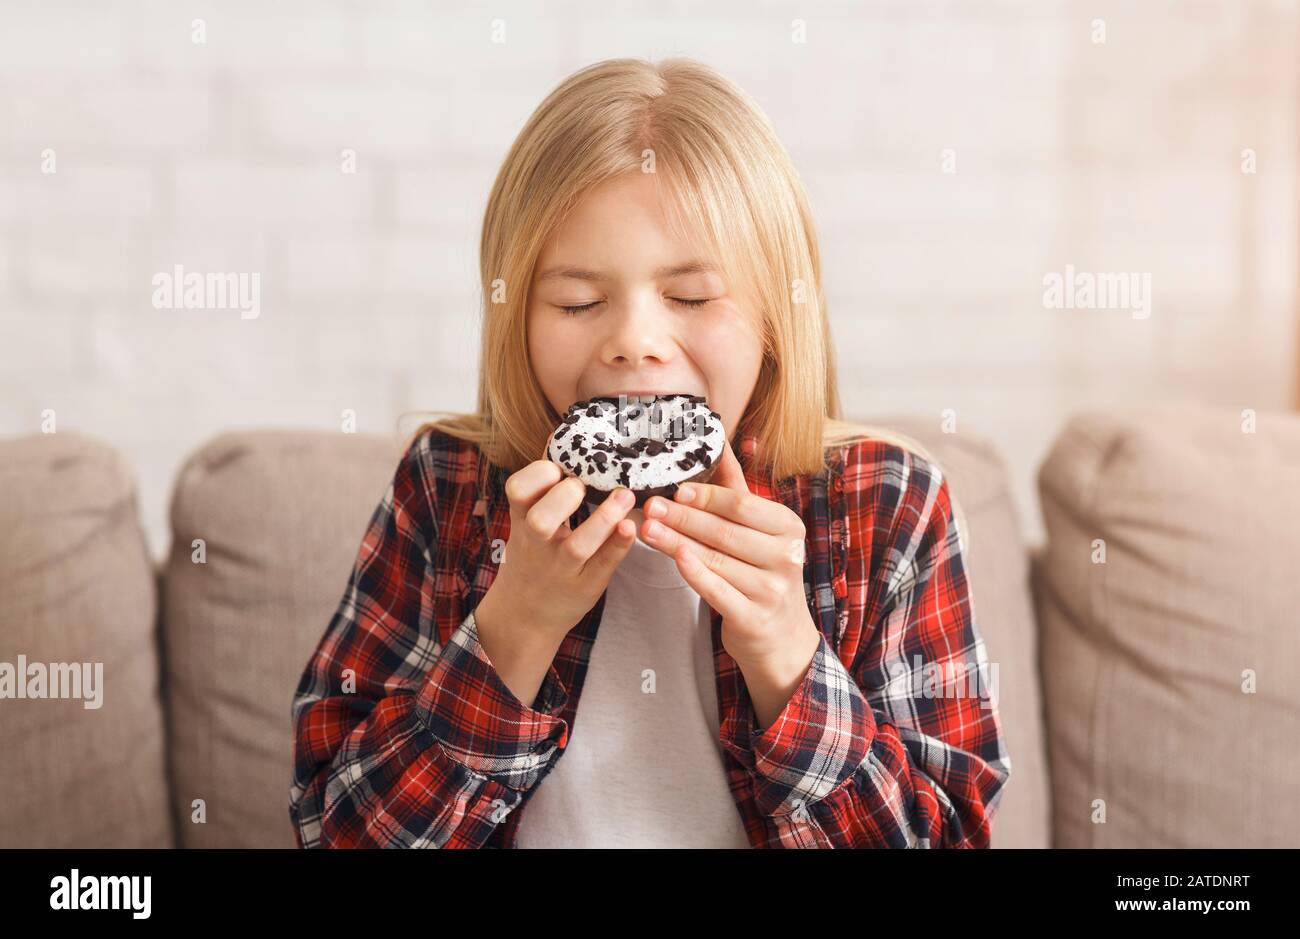 Little Girl Eating Donut Sitting On Couch At Home Stock Photo